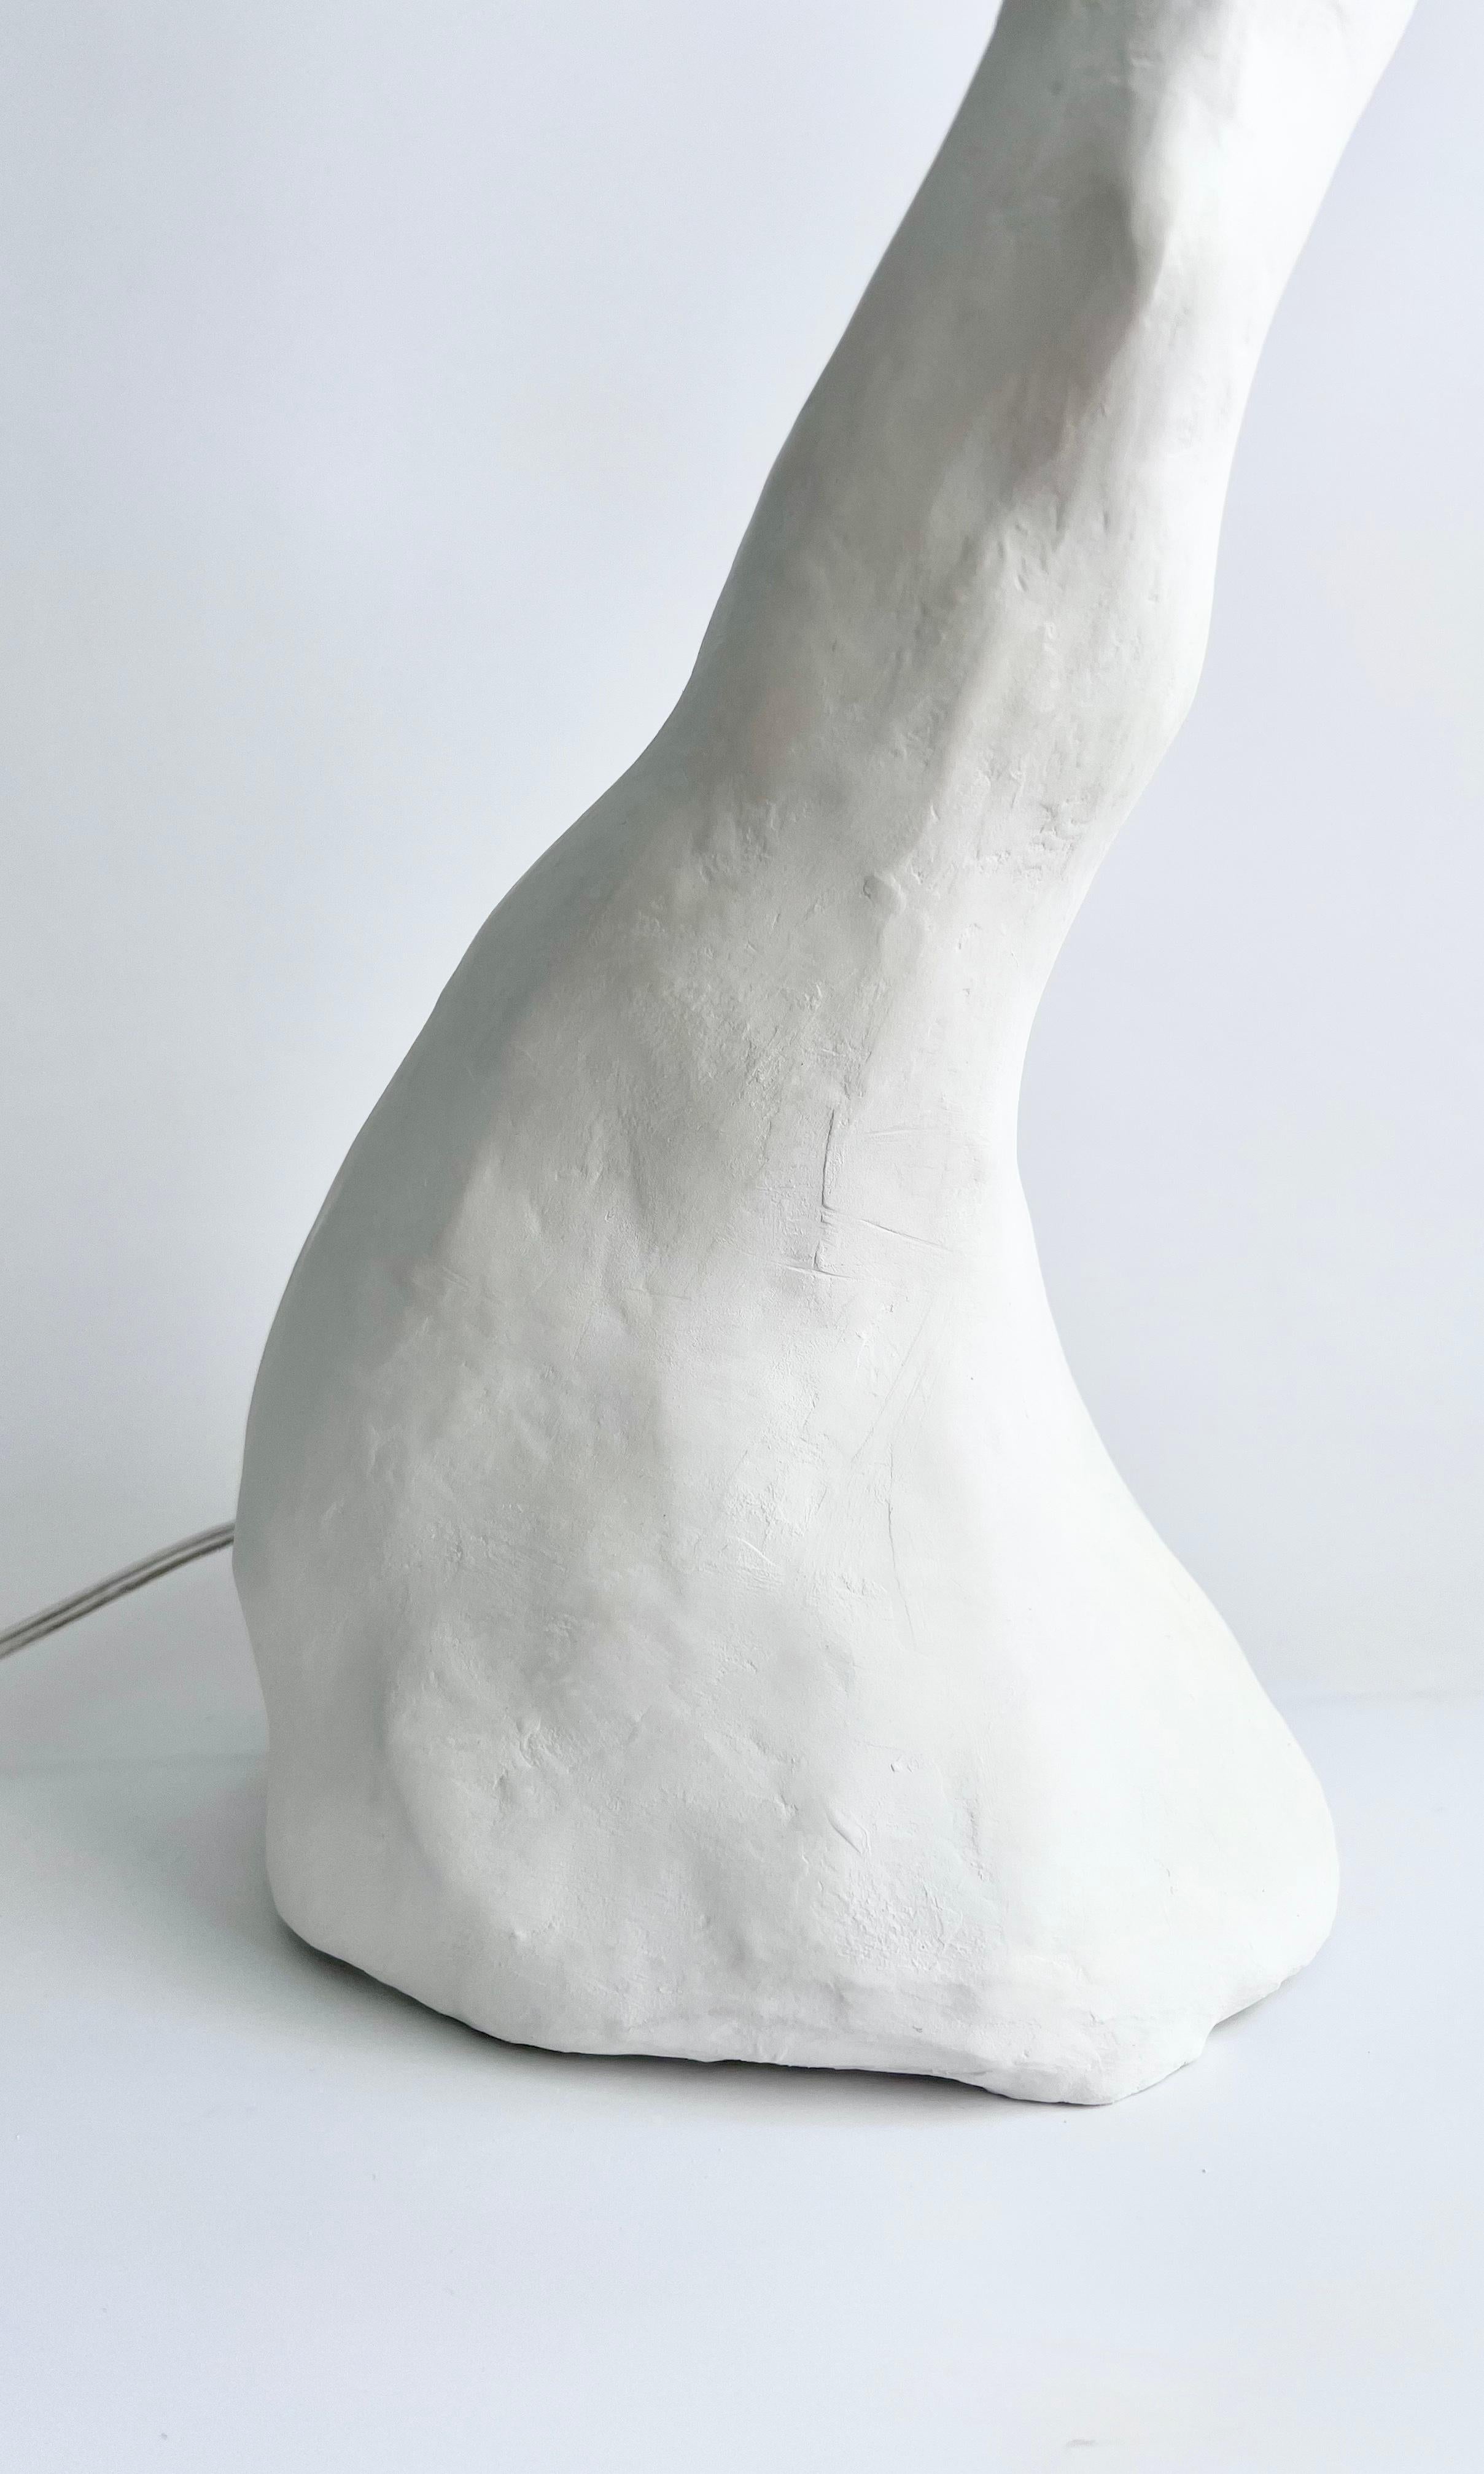 Carved Biomorphic Light by Studio Chora, Standing Lamp, White Limestone, Made-to-order For Sale